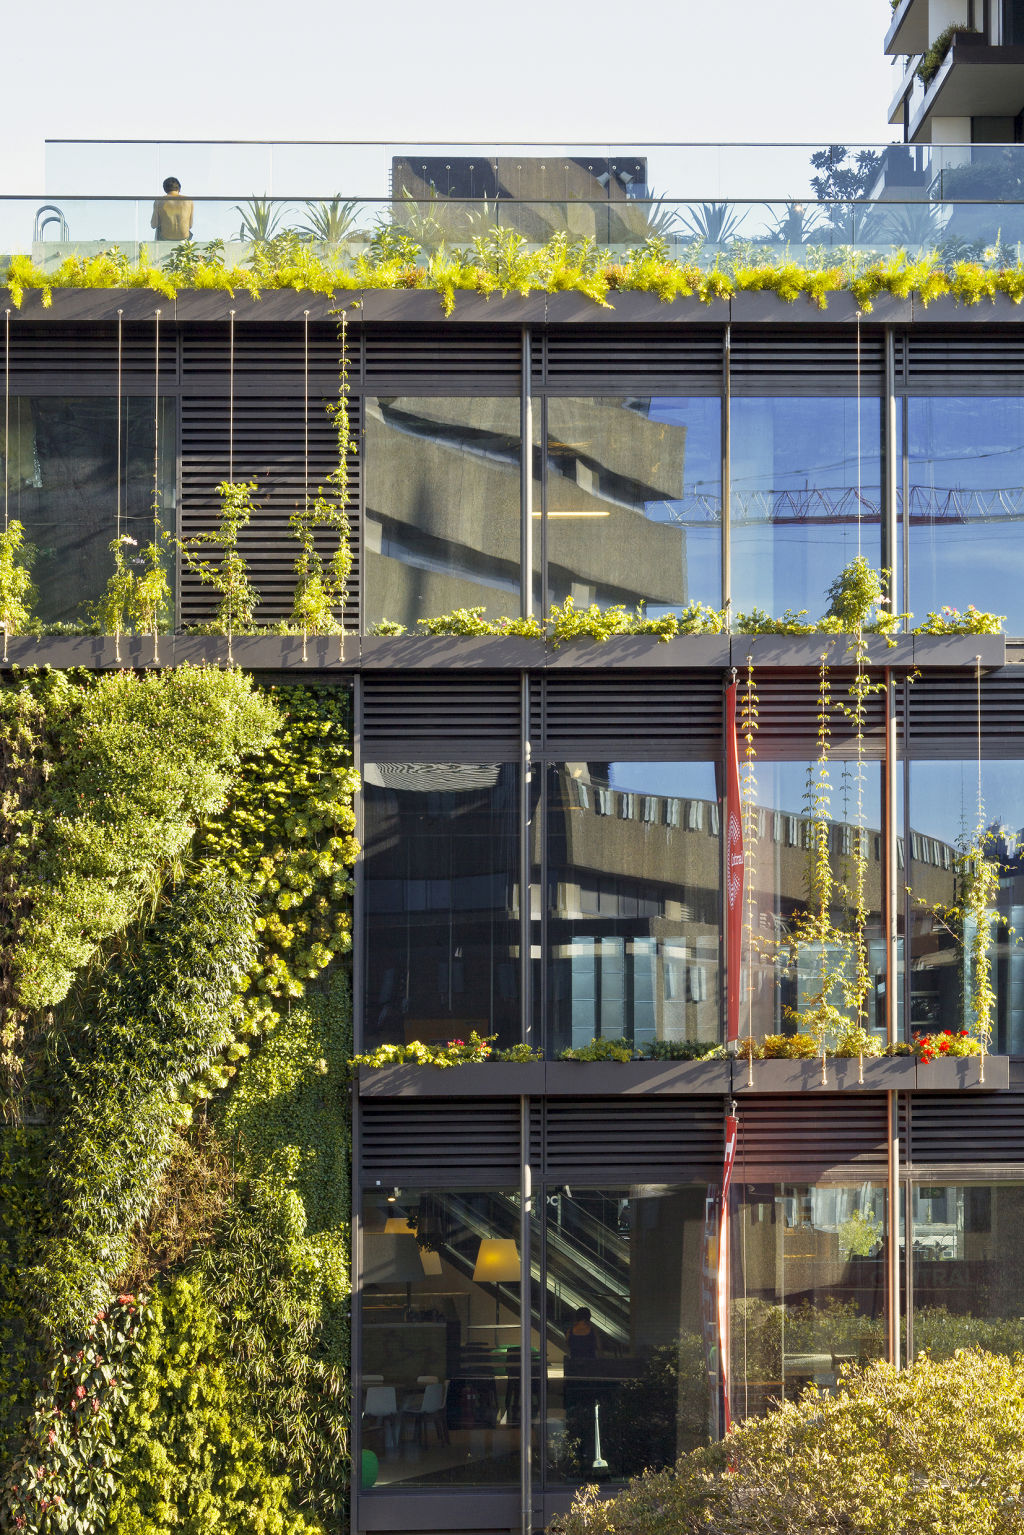 One Central Park, in Sydney, features 2700 linear planter boxes on balconies, internal sloping green wall, lush vertical facade gardens as well as podium and sky gardens. Photo: Supplied